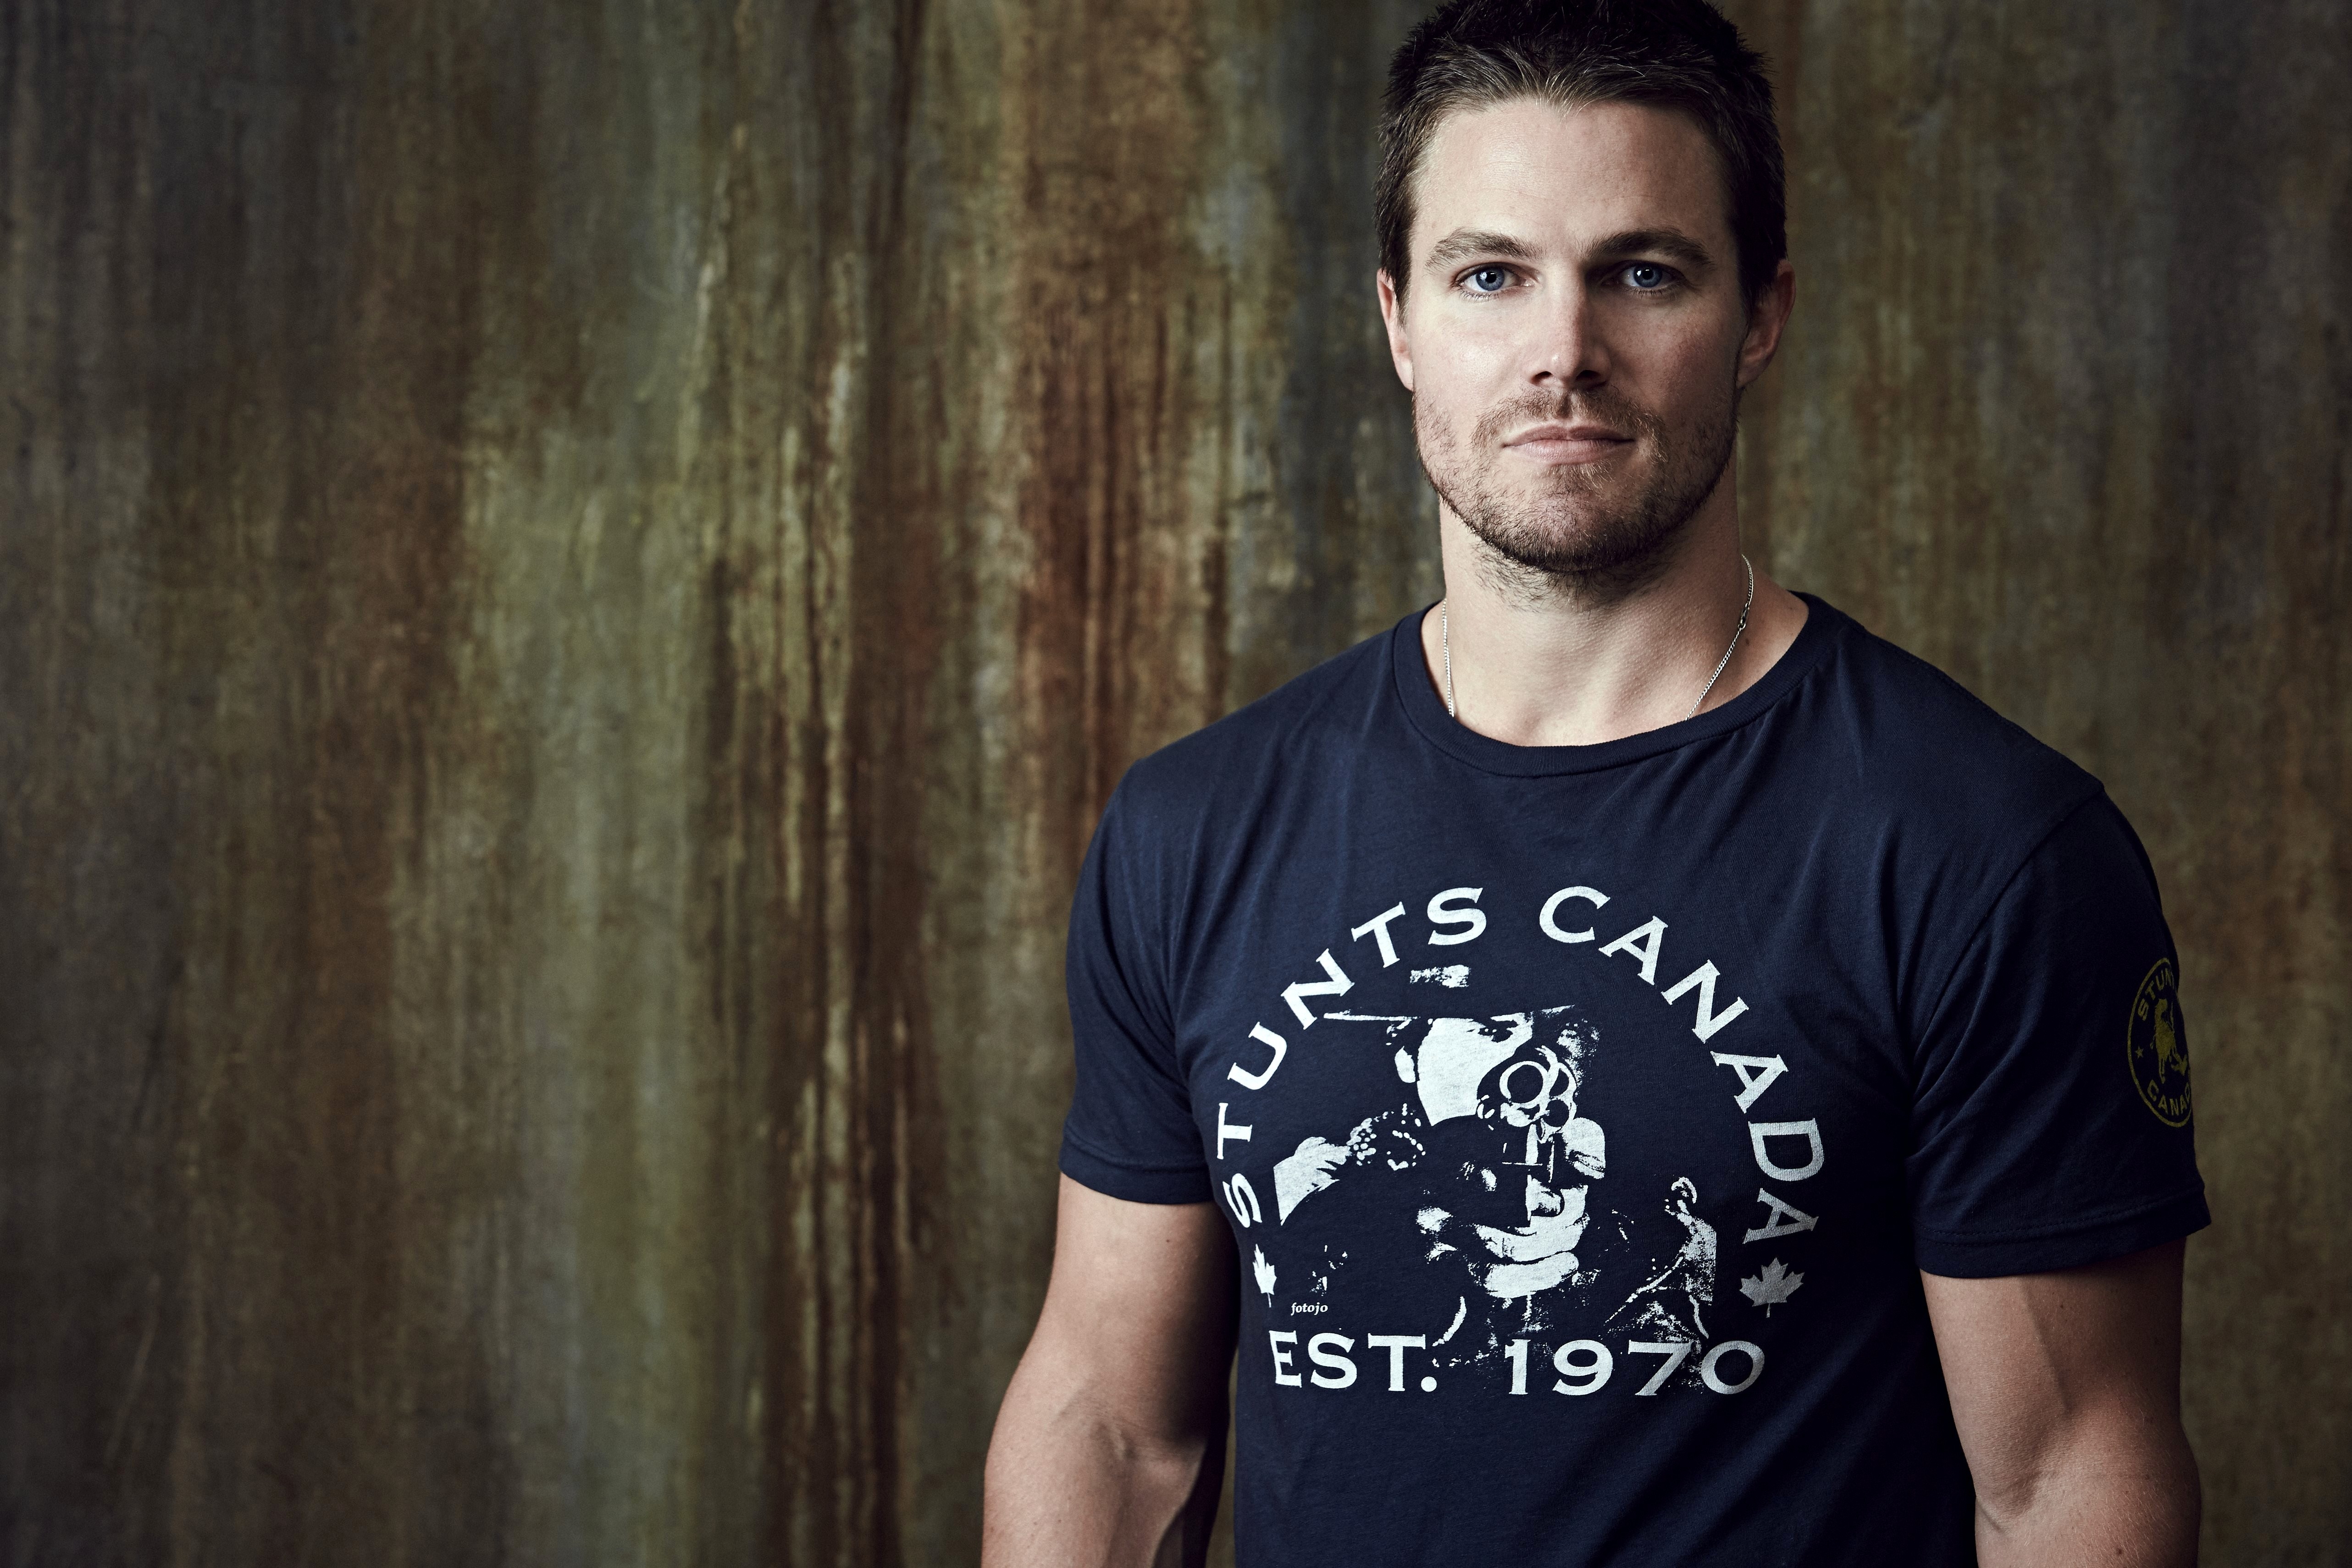 Wallpaper, black, model, T shirt, brunette, actor, fashion, spring, Person, Stephen Amell, cool, man, male, muscle, hairstyle, portrait photography, photo shoot, facial hair 5129x3420